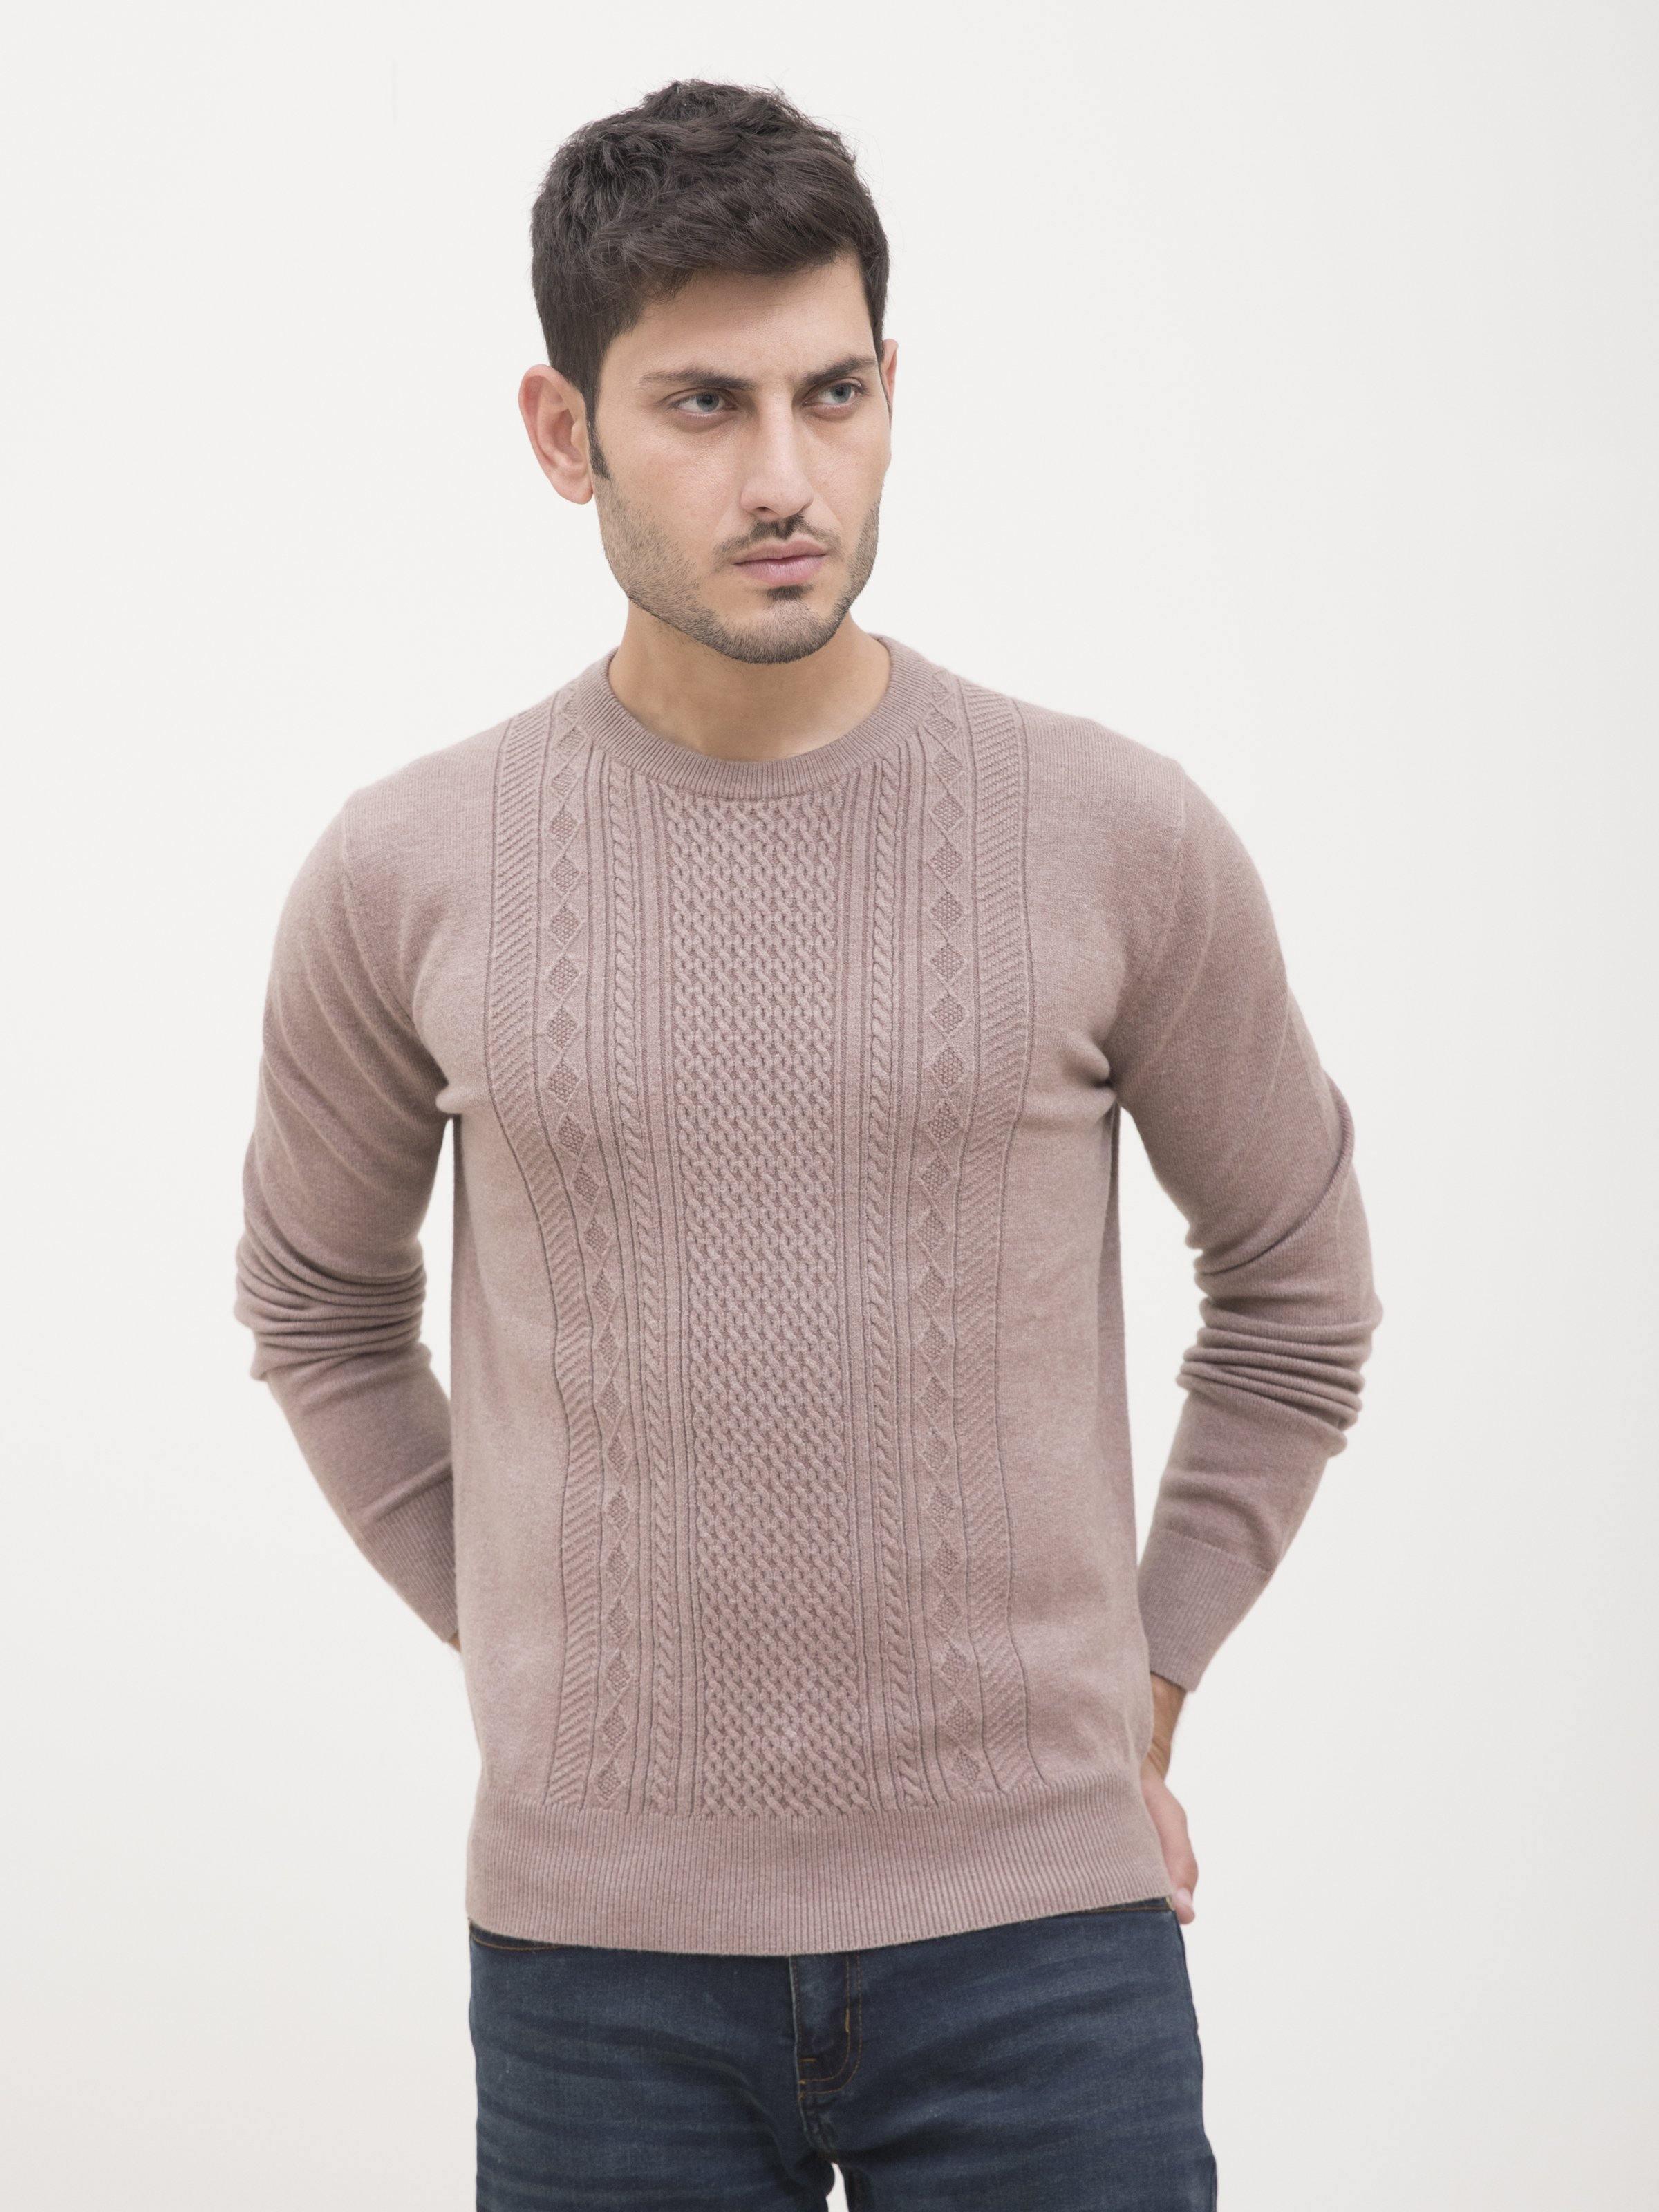 SWEATER CREW NECK FULL SLEEVE LIGHT BROWN at Charcoal Clothing